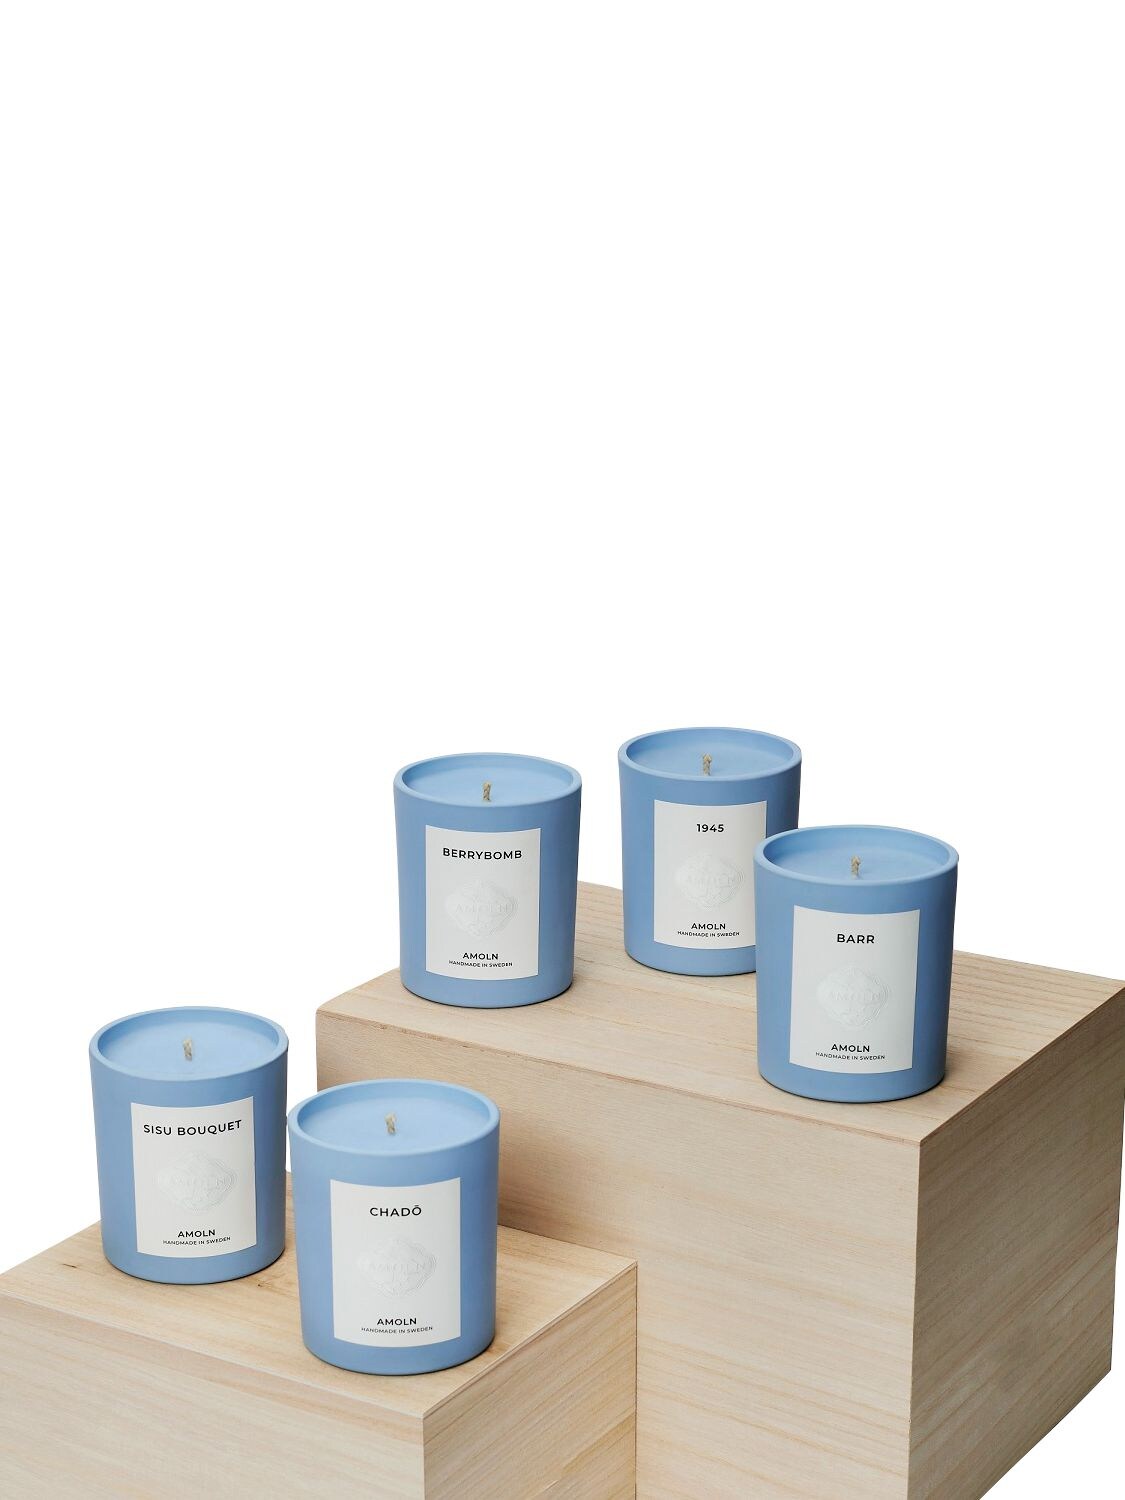 Shop Amoln Chado Scented Candle In Blue